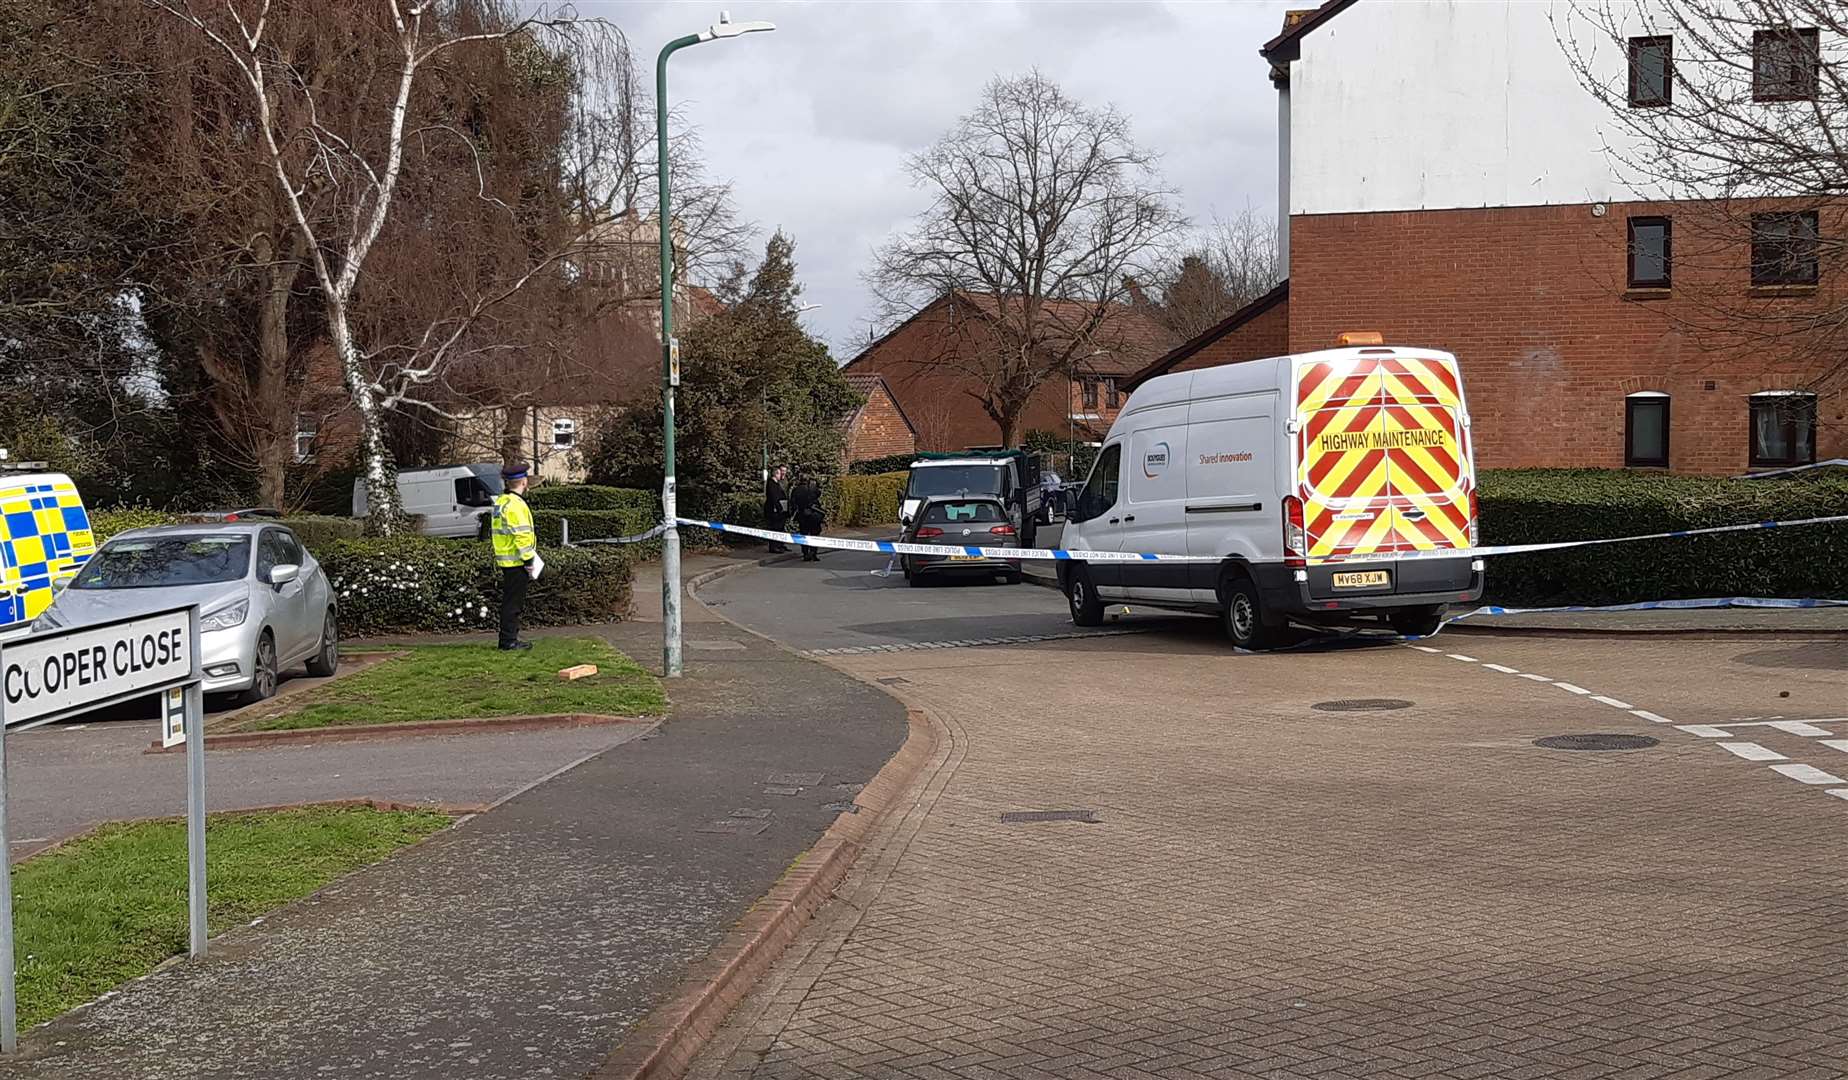 Police cordoned off an area outside Cooper Close, Greenhithe